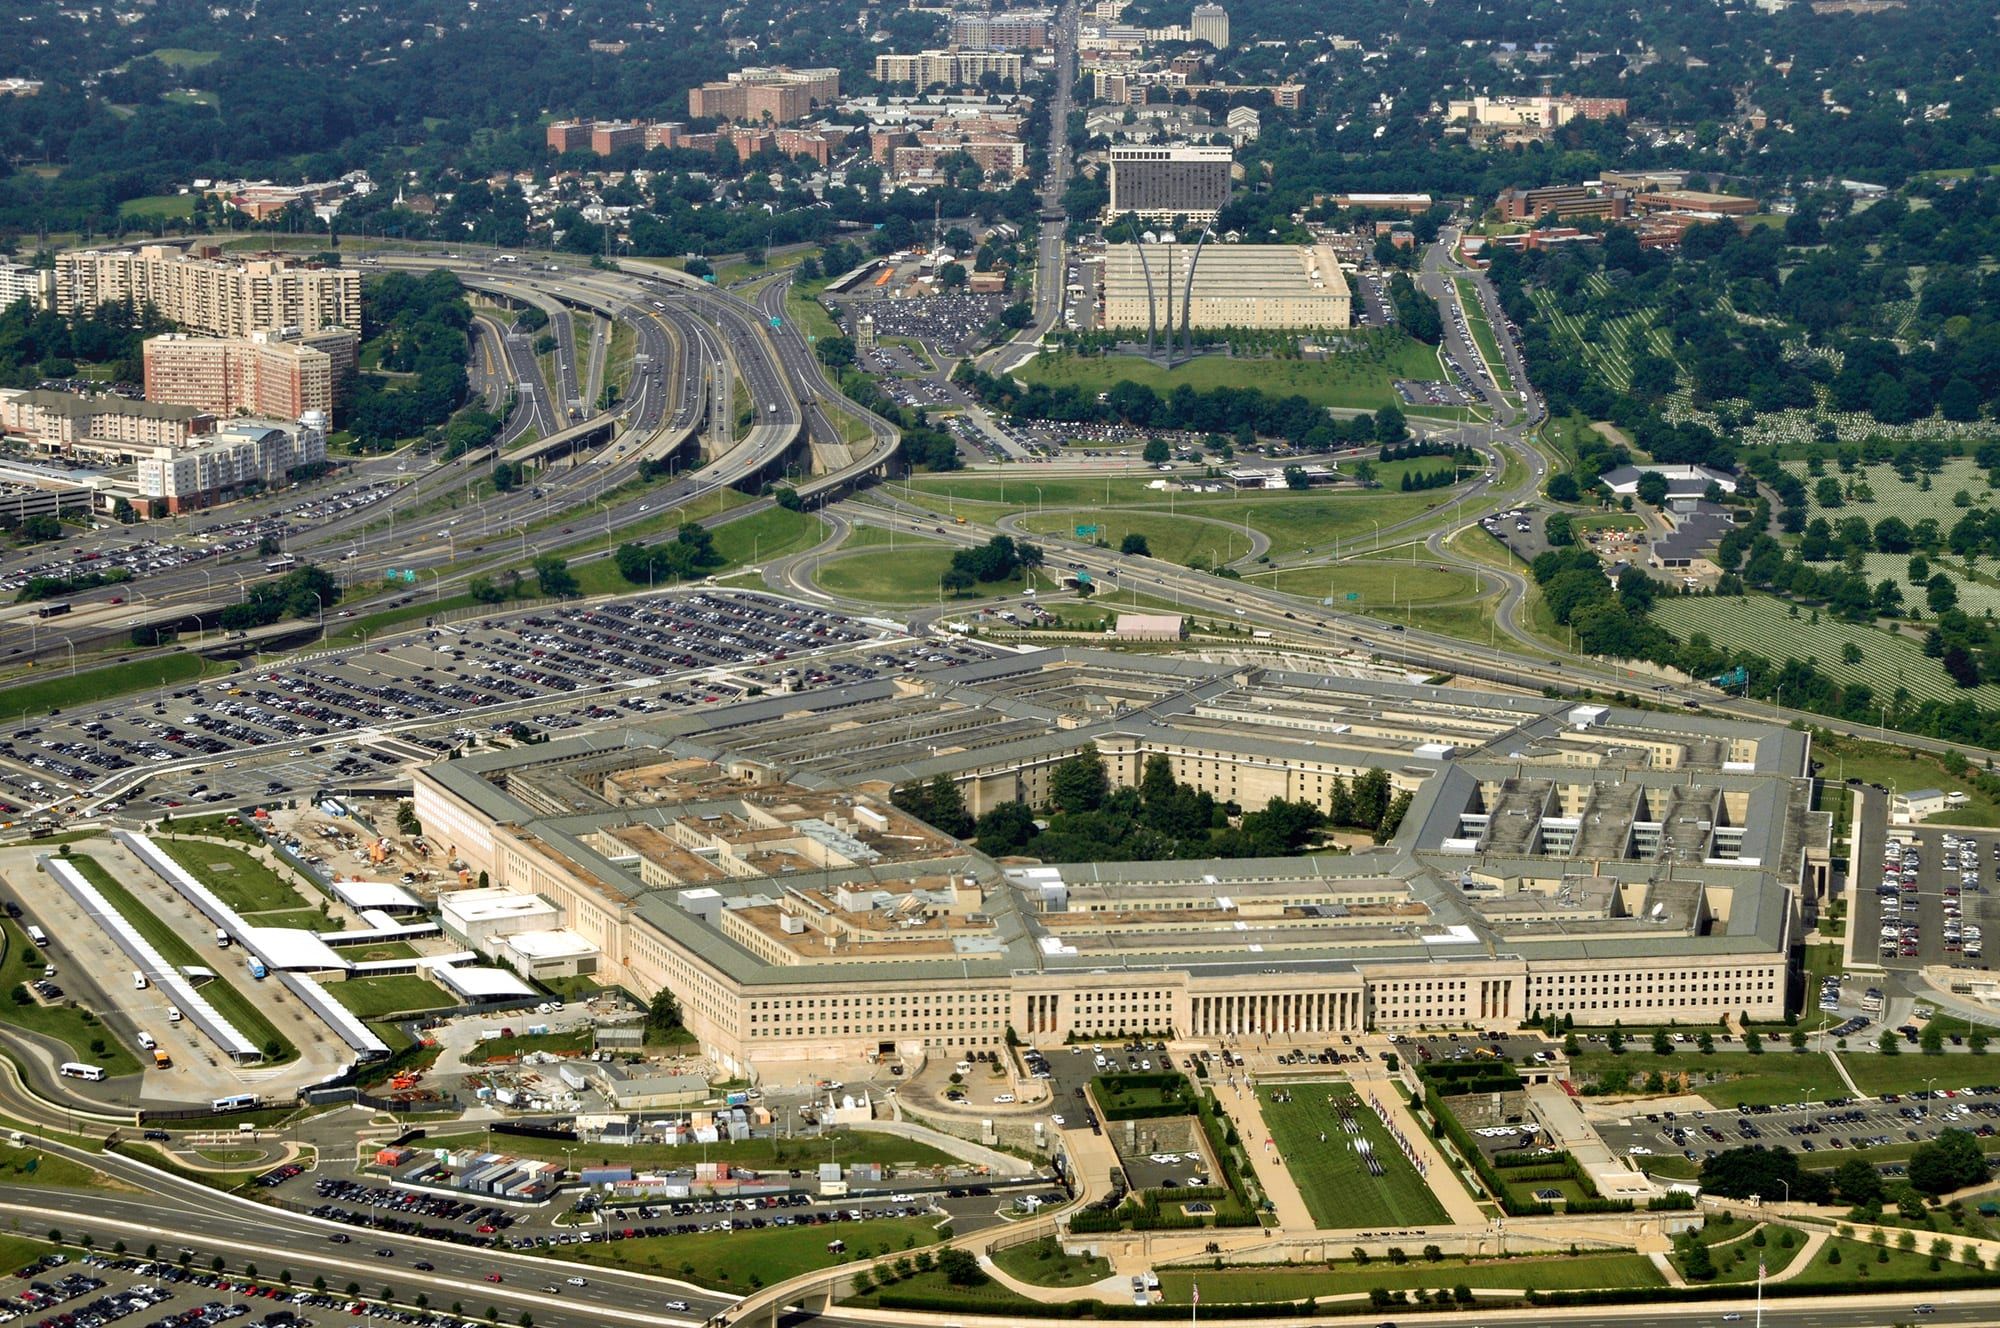 Pentagon emits more greenhouse gases than Portugal or Sweden: study